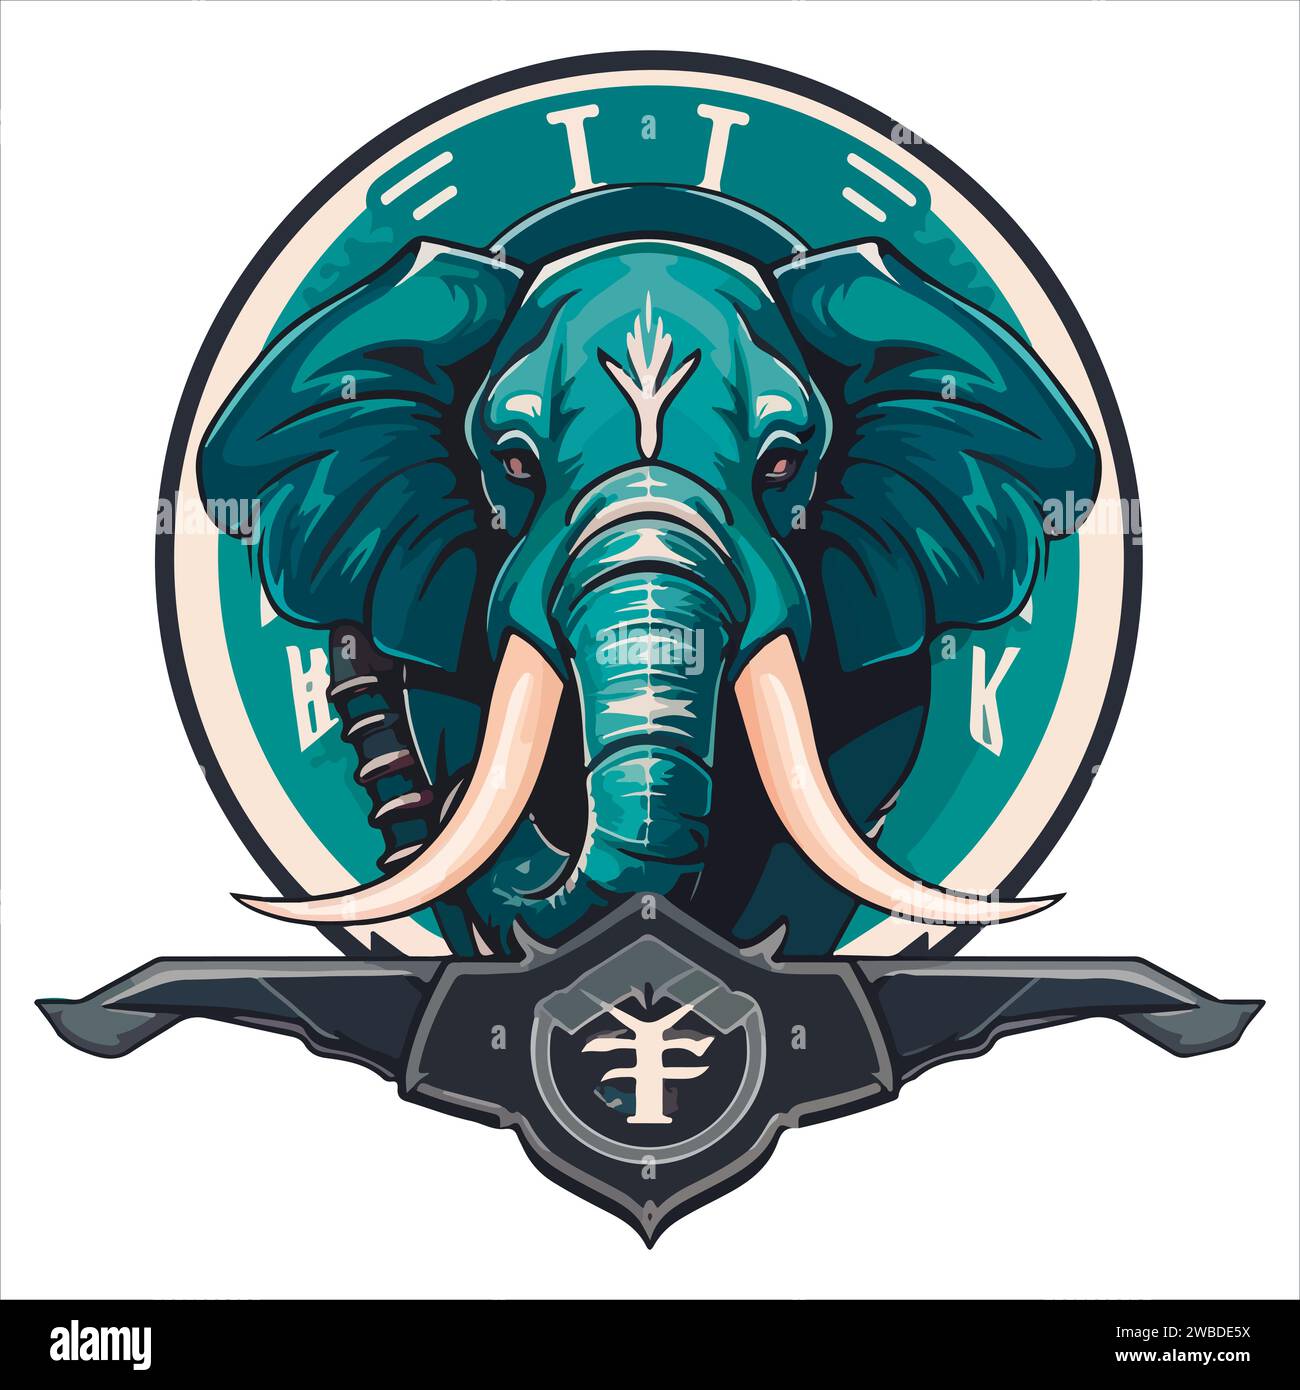 elephant mascot logo design vector with modern illustration concept style for badge, emblem and tshirt printing. angry elephant illustration with feet Stock Vector